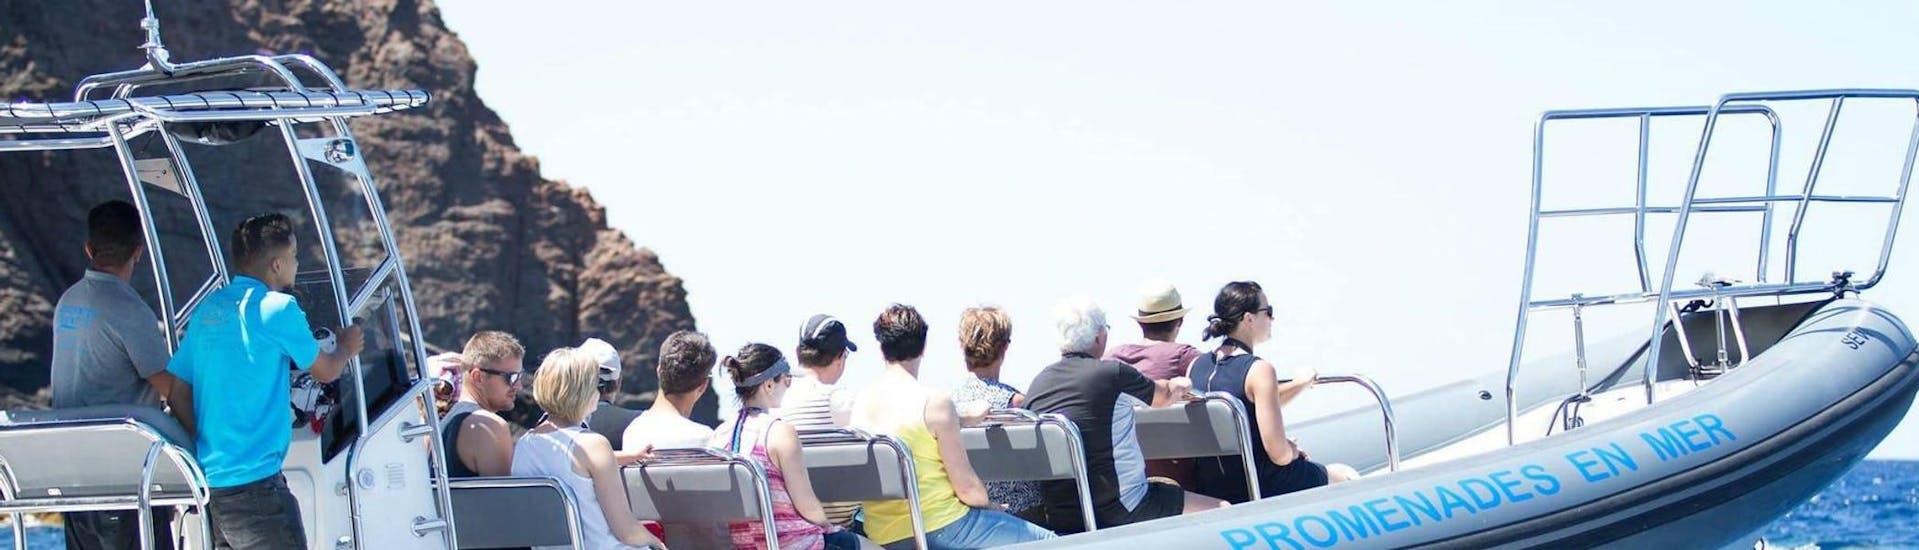 A group is enjoying the Boat Tour in Golfe de Porto - Grand Tour operated by Avventu Event's.